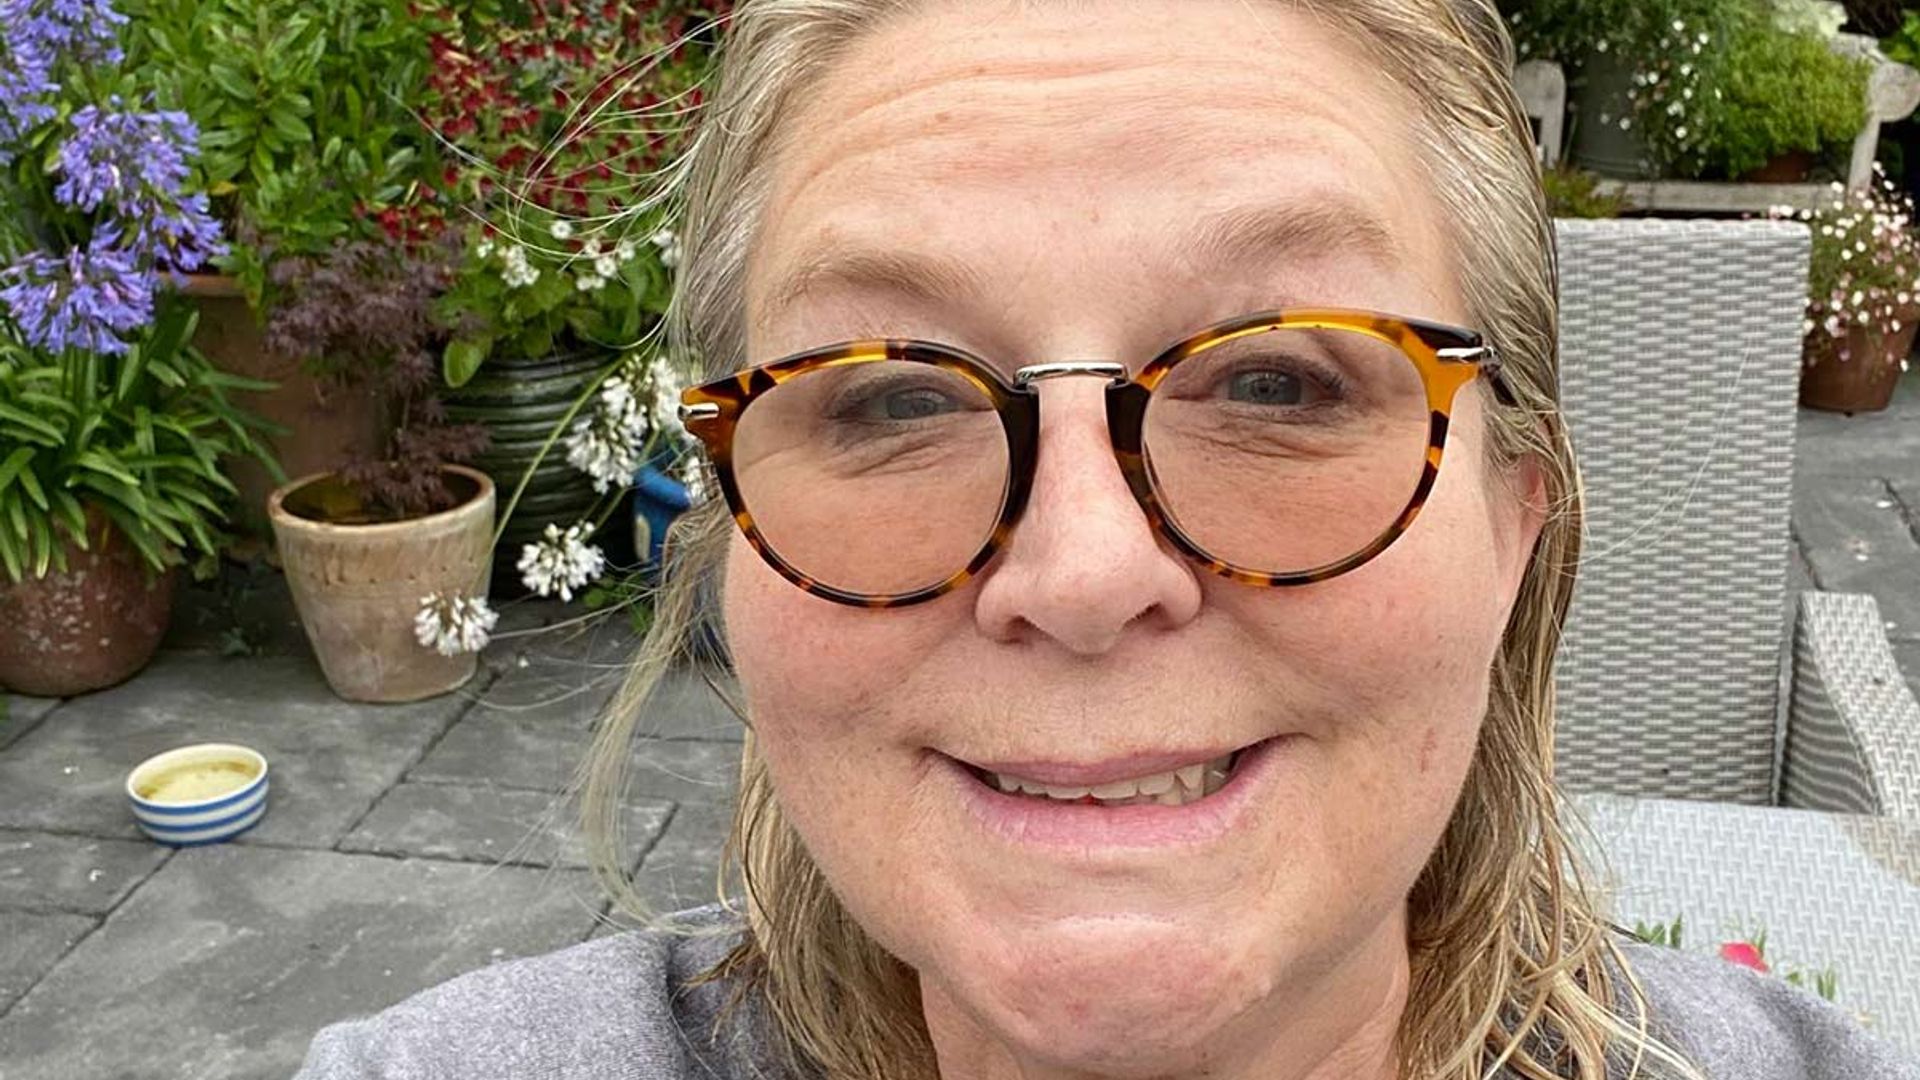 Fern Britton goes makeup-free as she shows off beautiful garden in Cornwall home